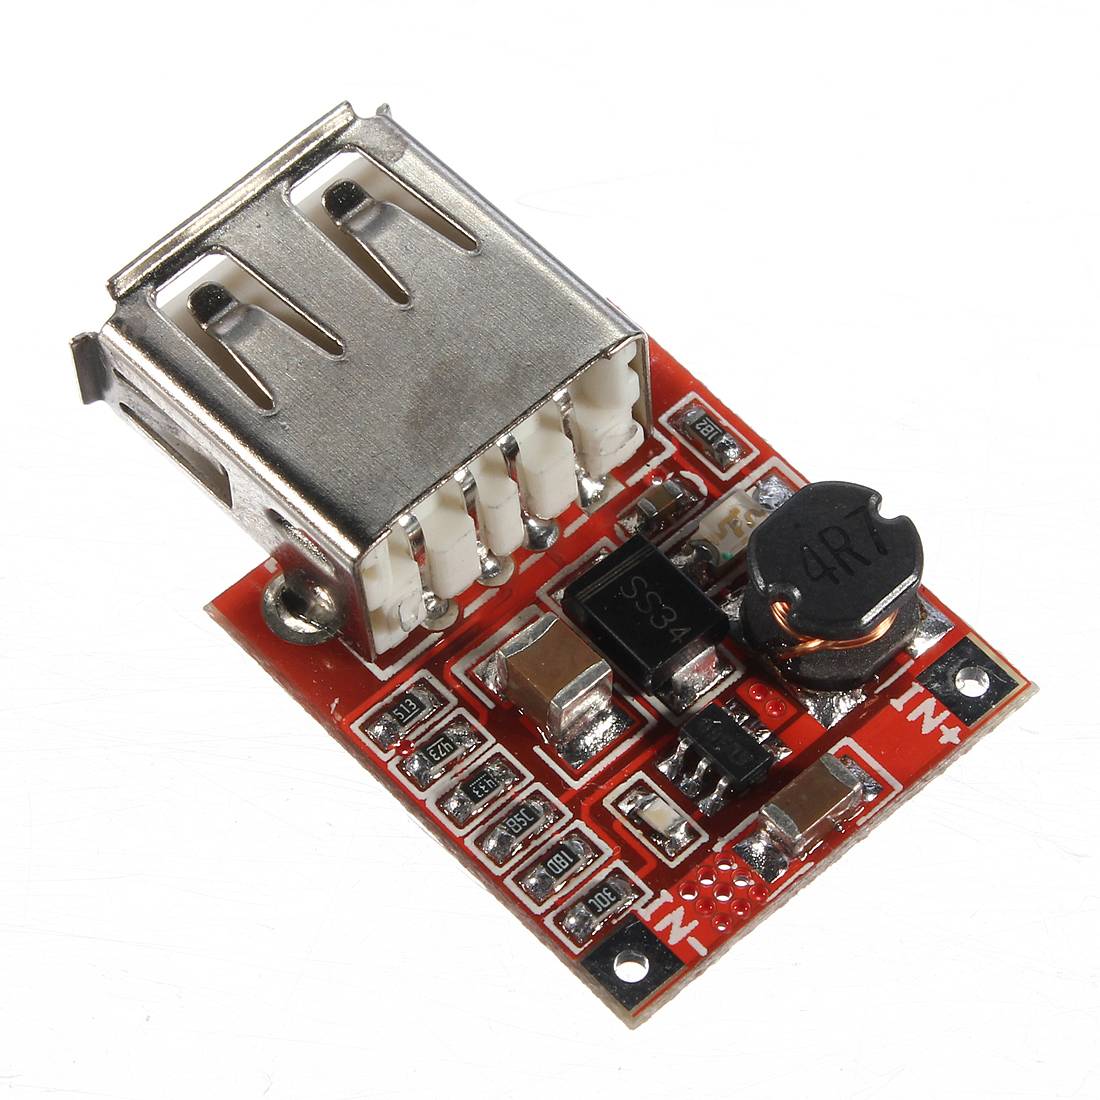 3V-To-5V-1A-USB-Charger-DC-DC-Converter-Step-Up-Boost-Module-For-Phone-MP3-MP4-Geekcreit-for-Arduino-89326-1